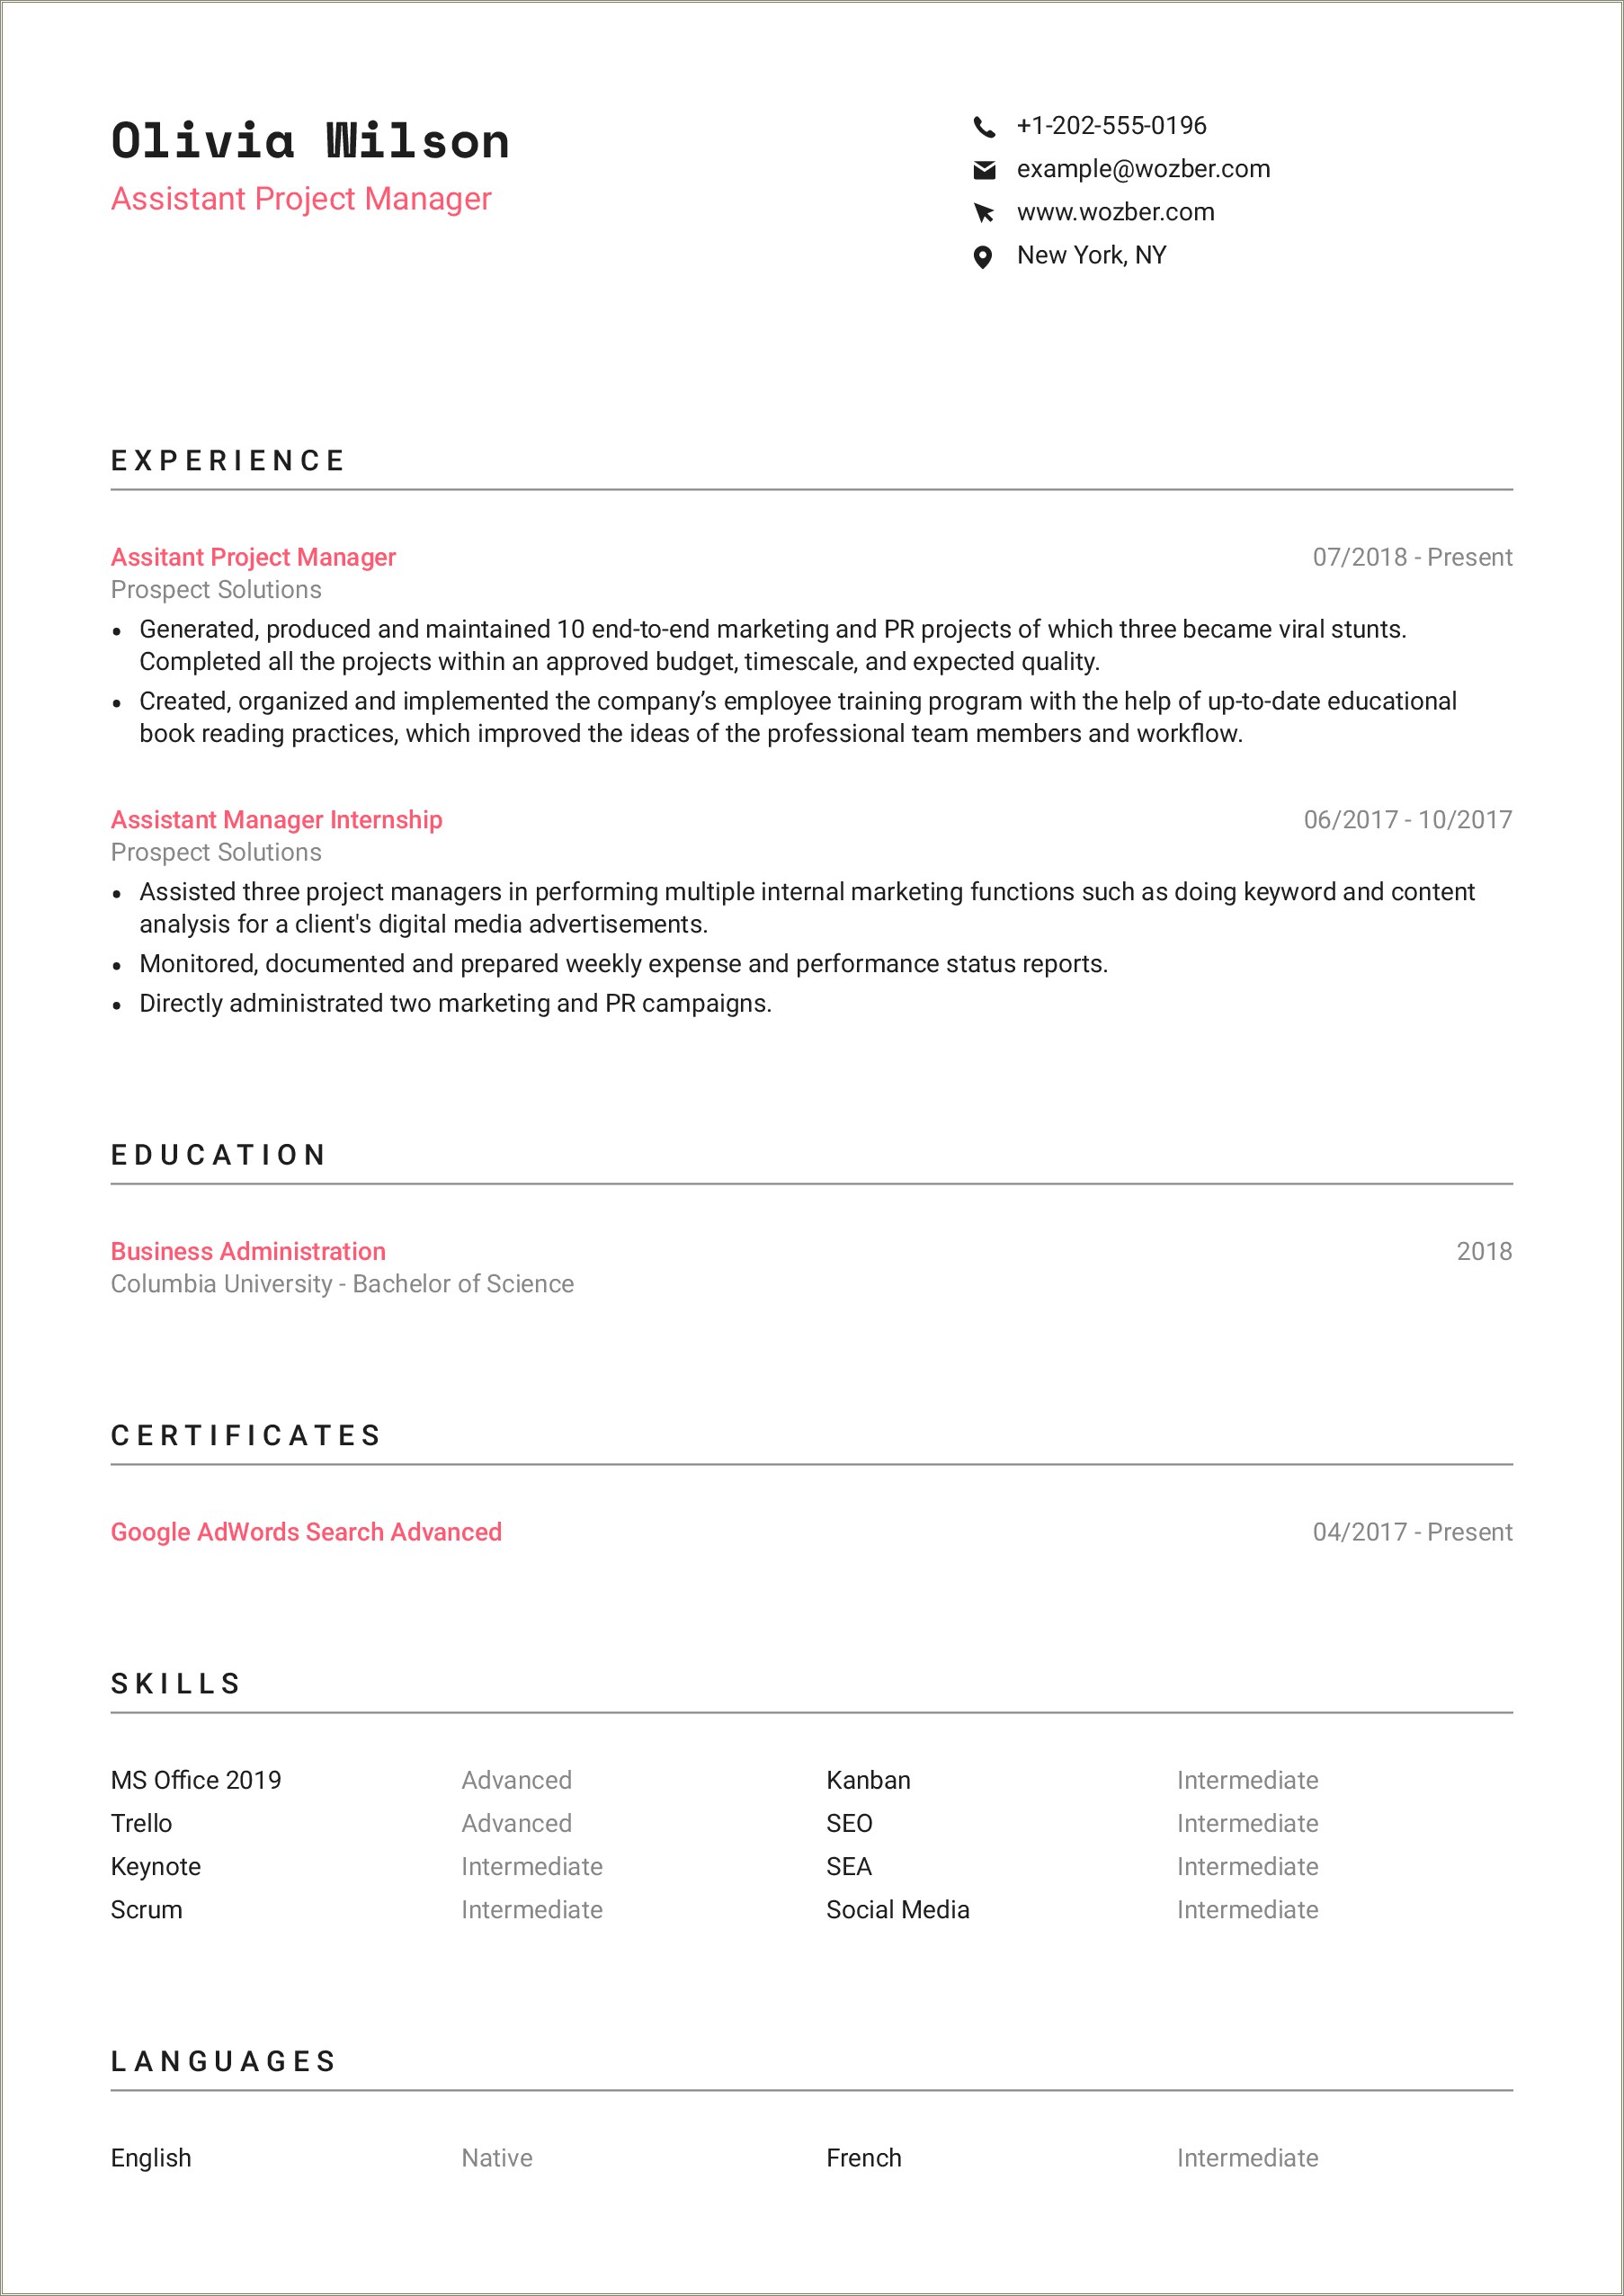 Professional Modern Downloadable Resume Template Free